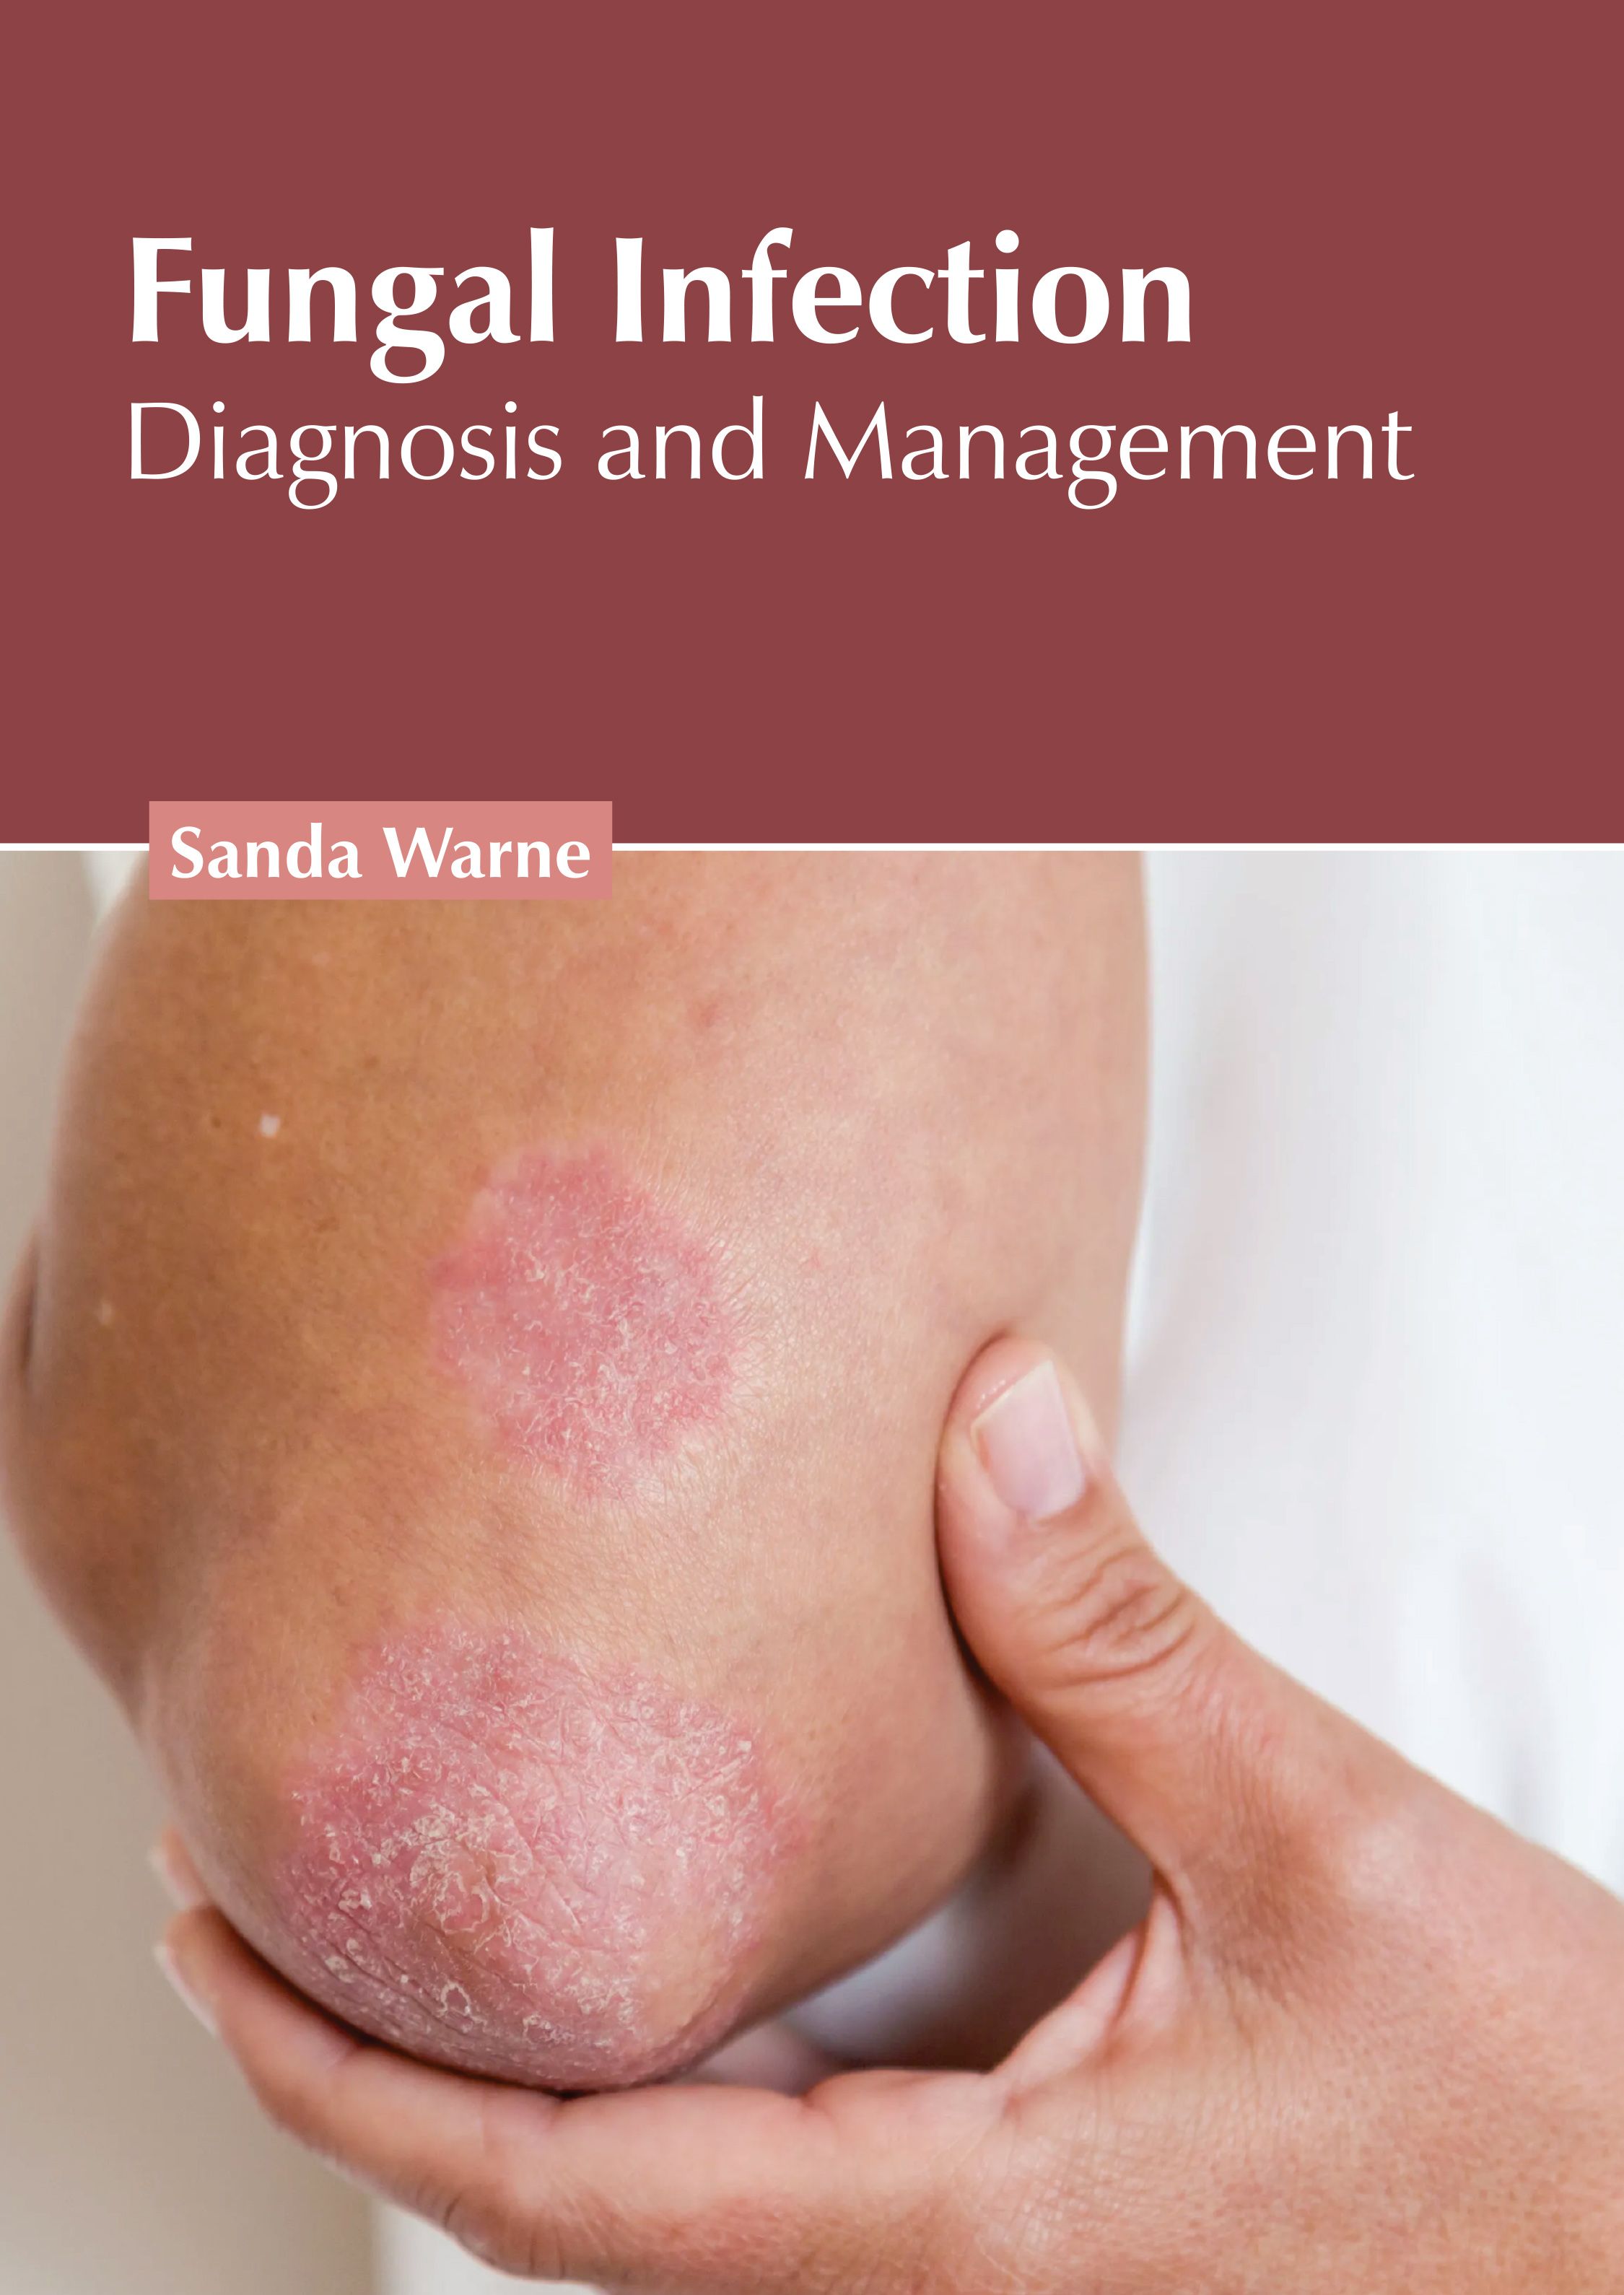 FUNGAL INFECTION: DIAGNOSIS AND MANAGEMENT